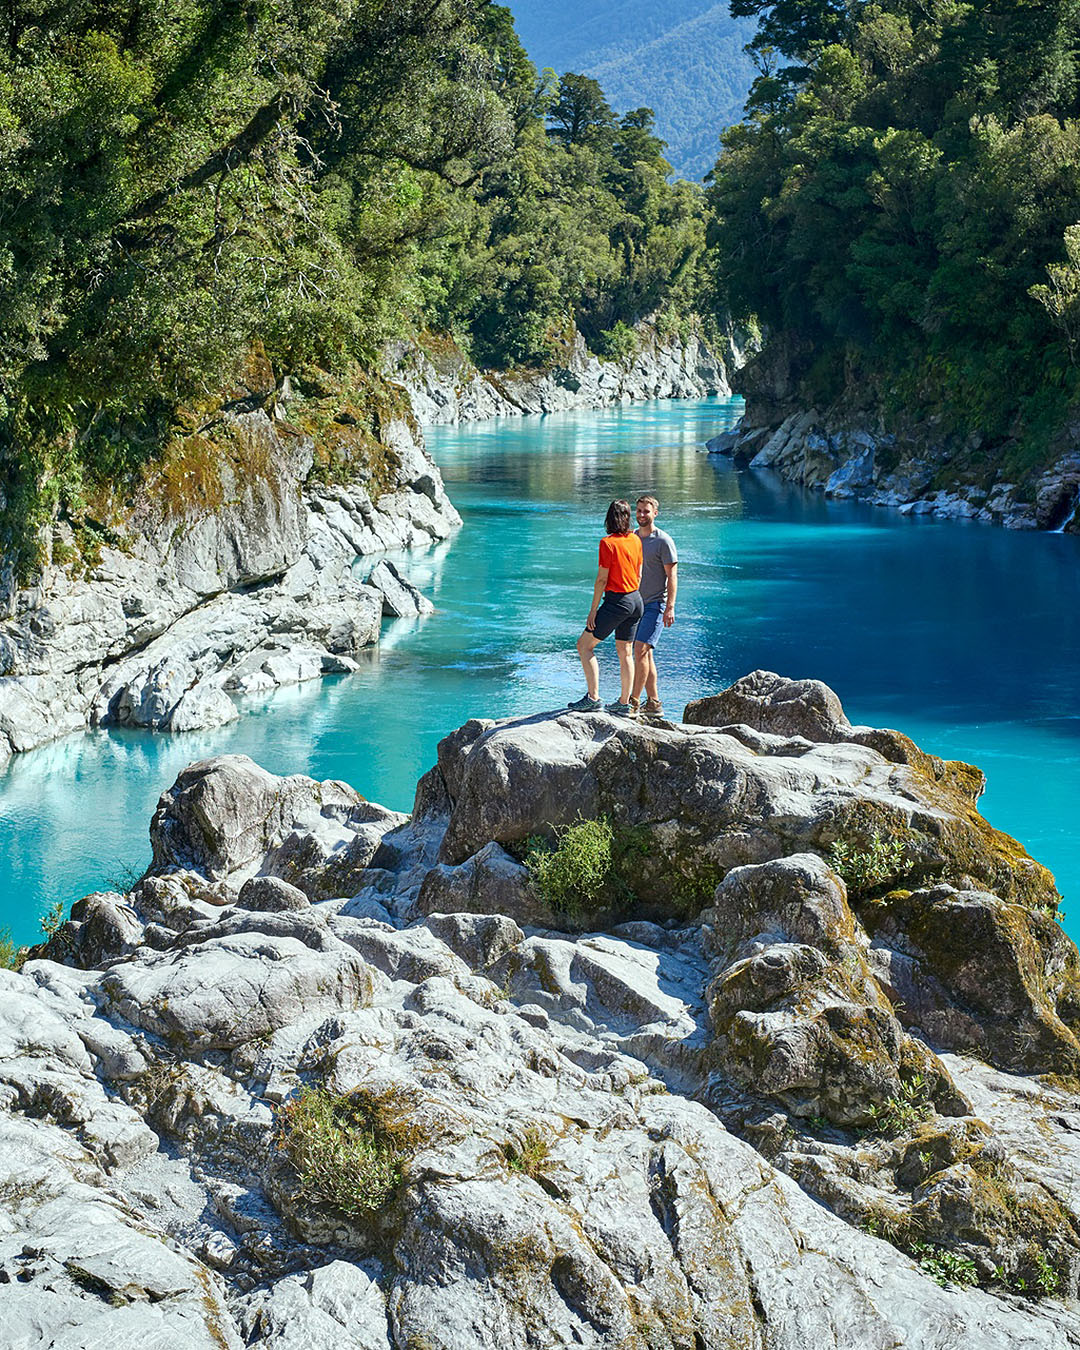 A stunning view of Hokitika Gorge with people scrambling over the rocks.